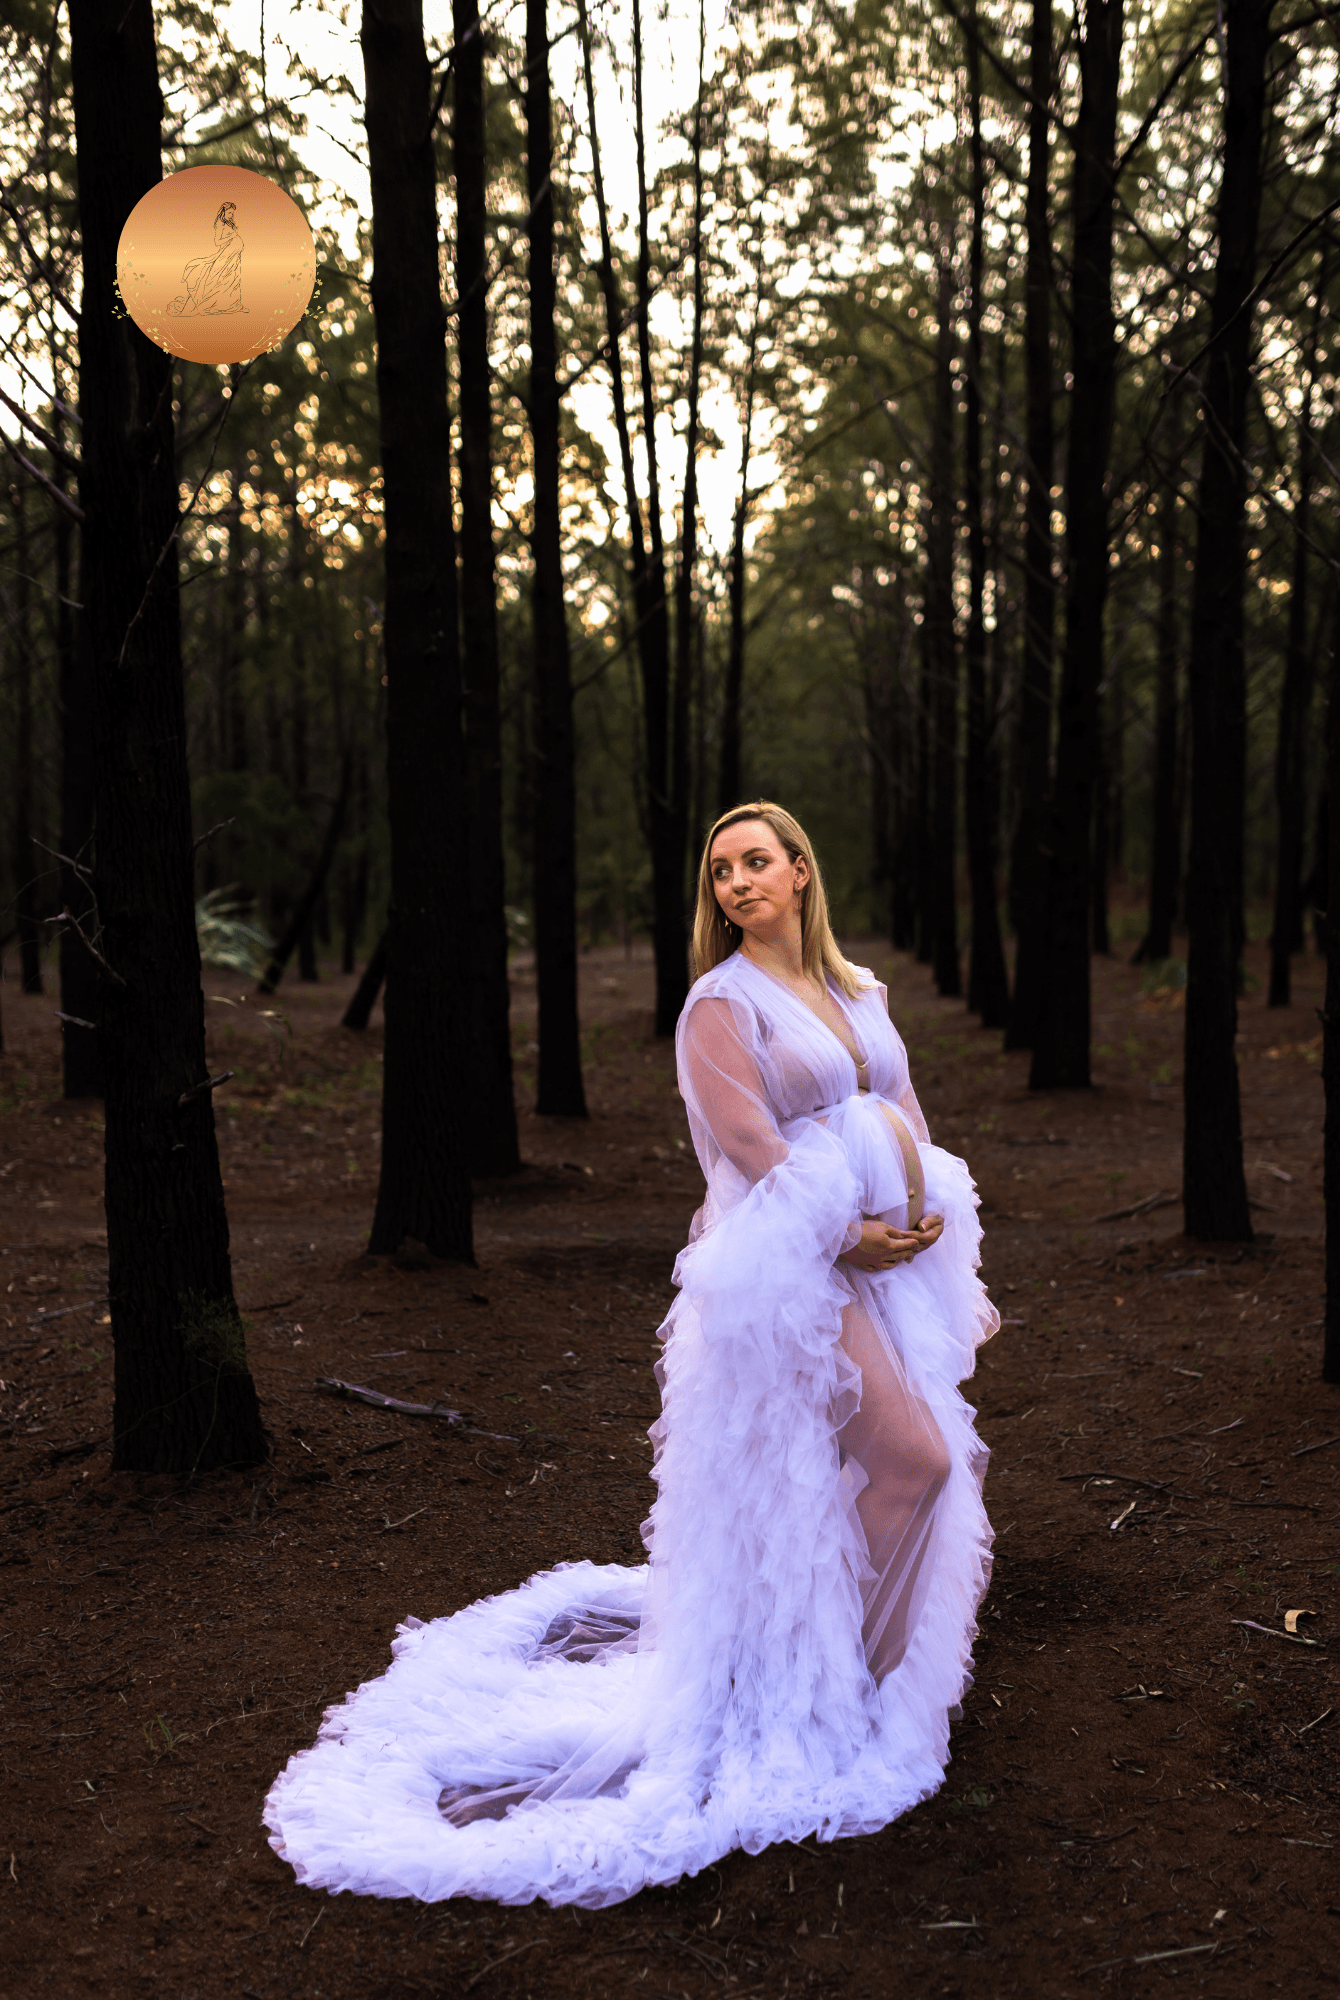 Dress Hire - Maternity Photoshoot Dresses - Bridal Robe - White Tulle Robe - Sophie - 4 DAY RENTAL - Luxe Bumps AU